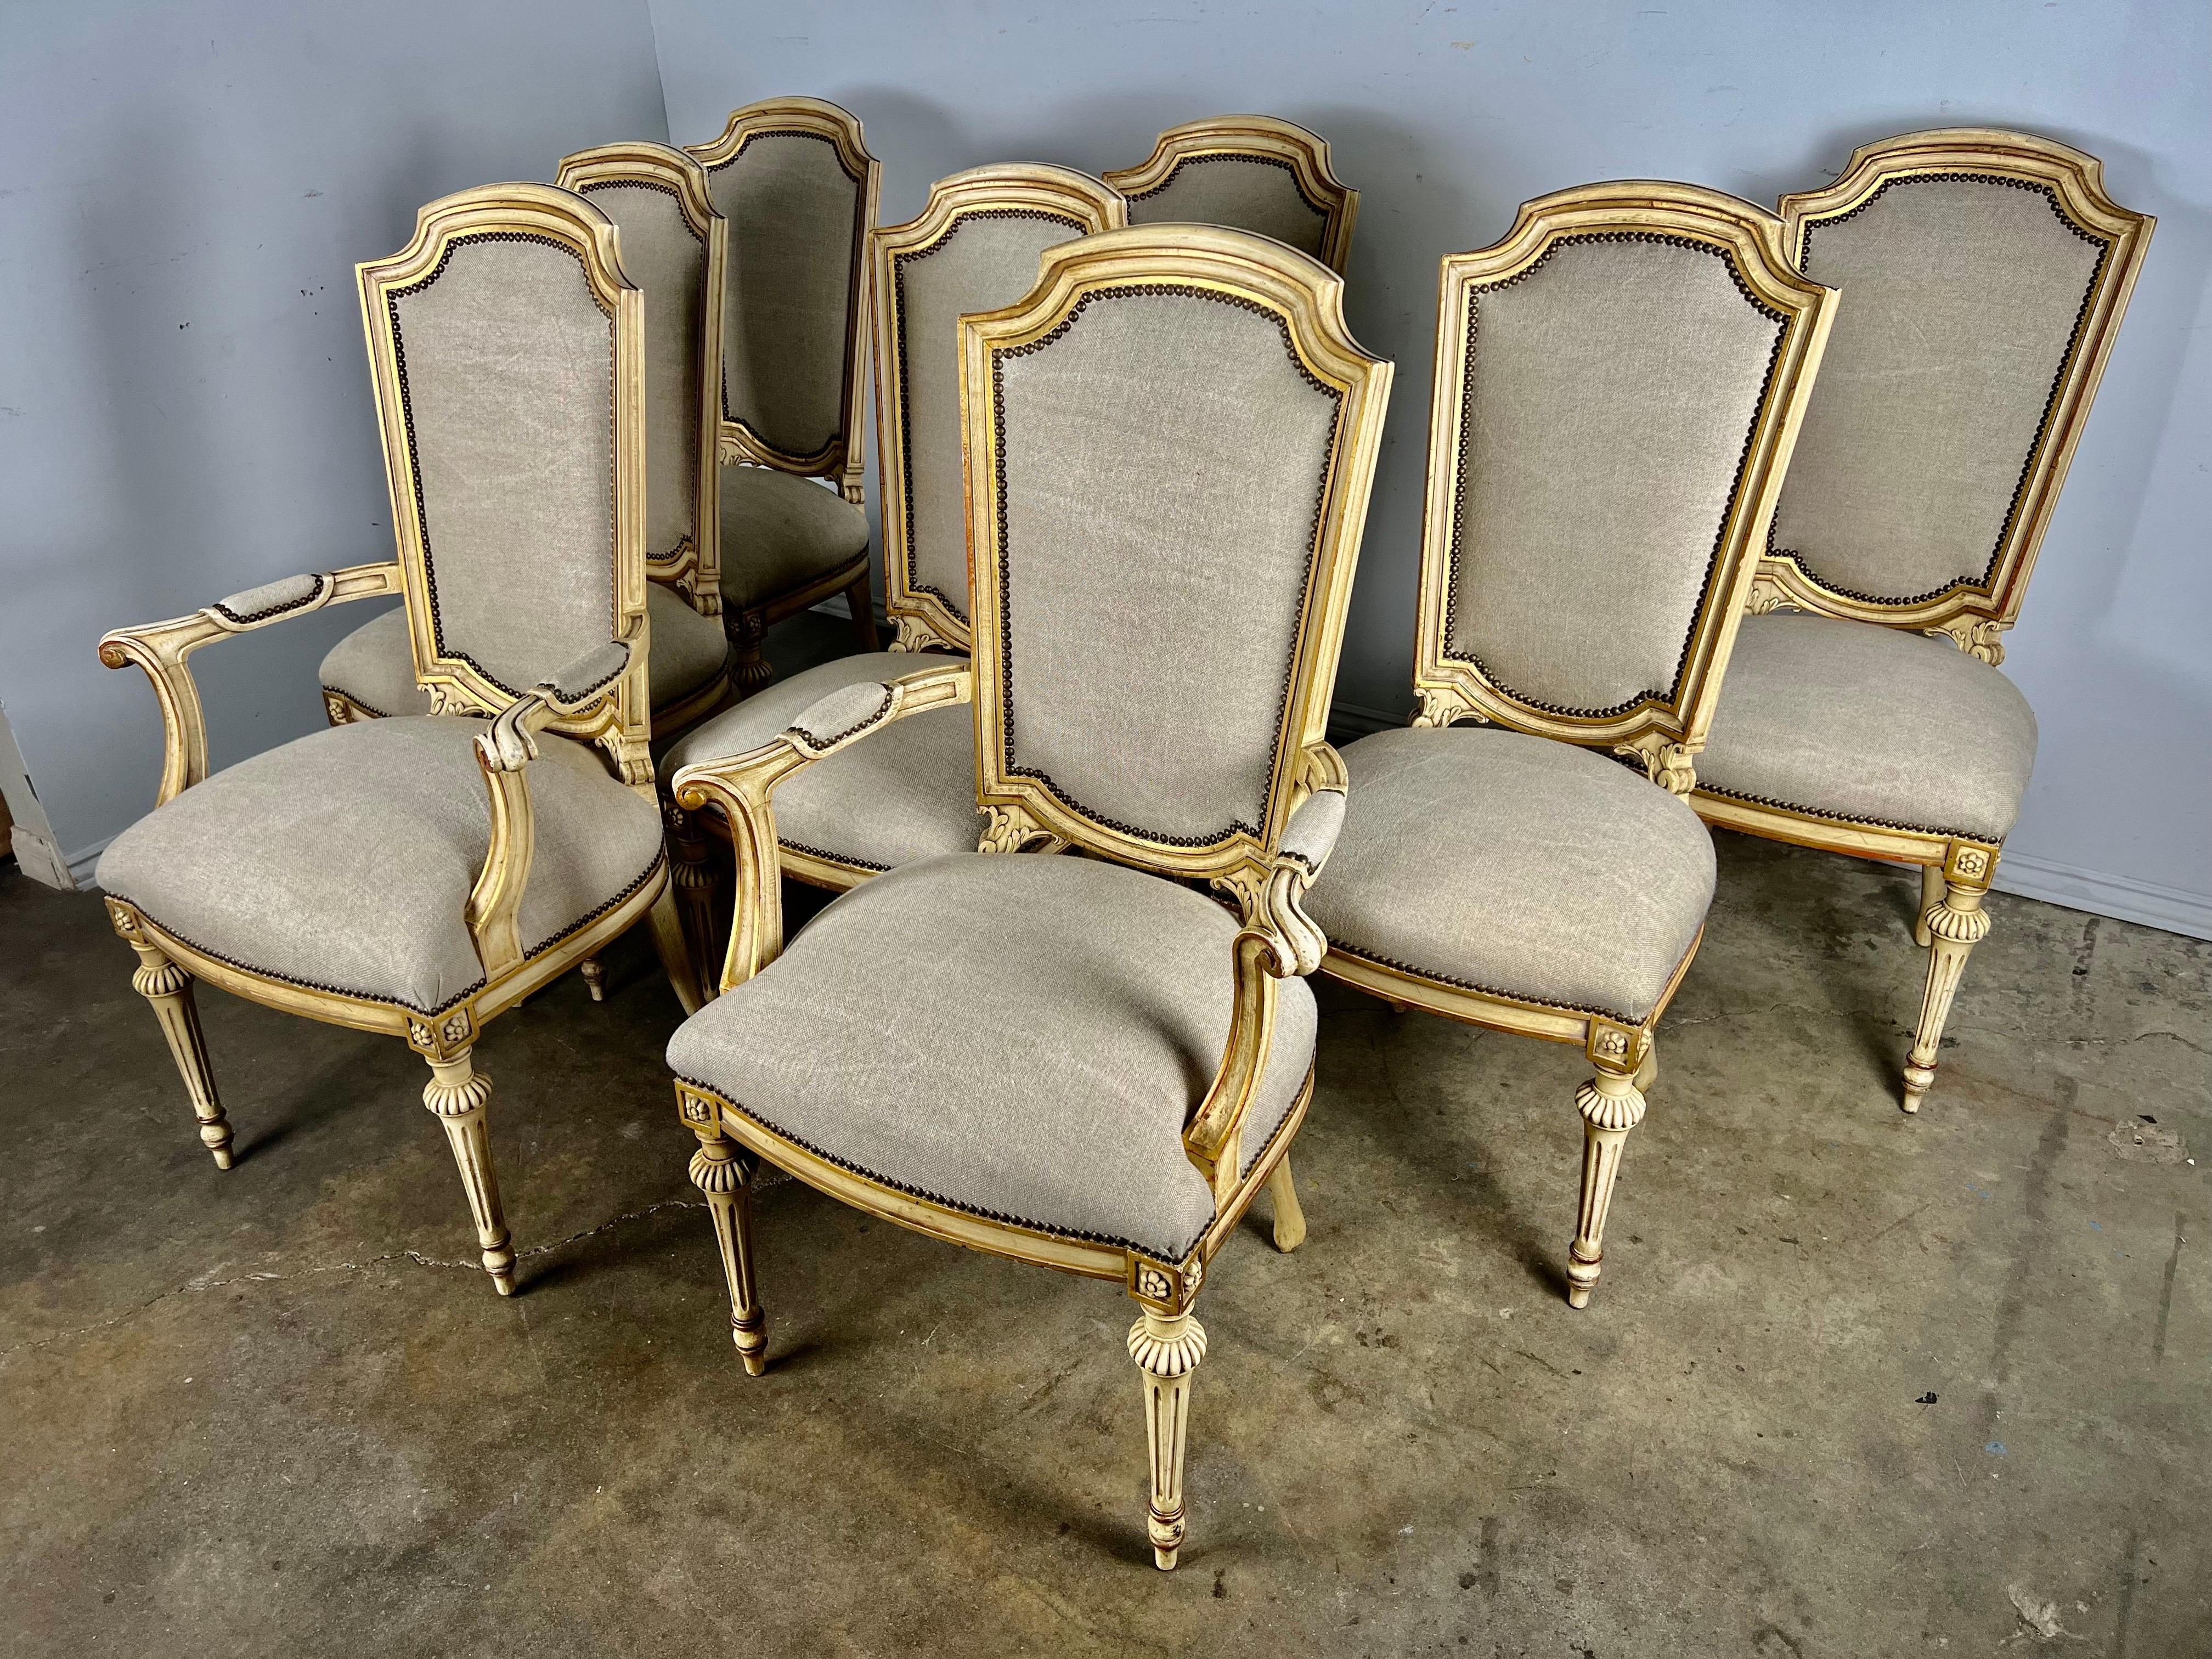 Set of eight 1930's painted Neoclassical style dining chairs. The chairs stand on four straight legs that have a fluted ball at the top of the legs. The chairs are beautifully painted in a two-tone coloration. They are newly upholstered in a Belgium